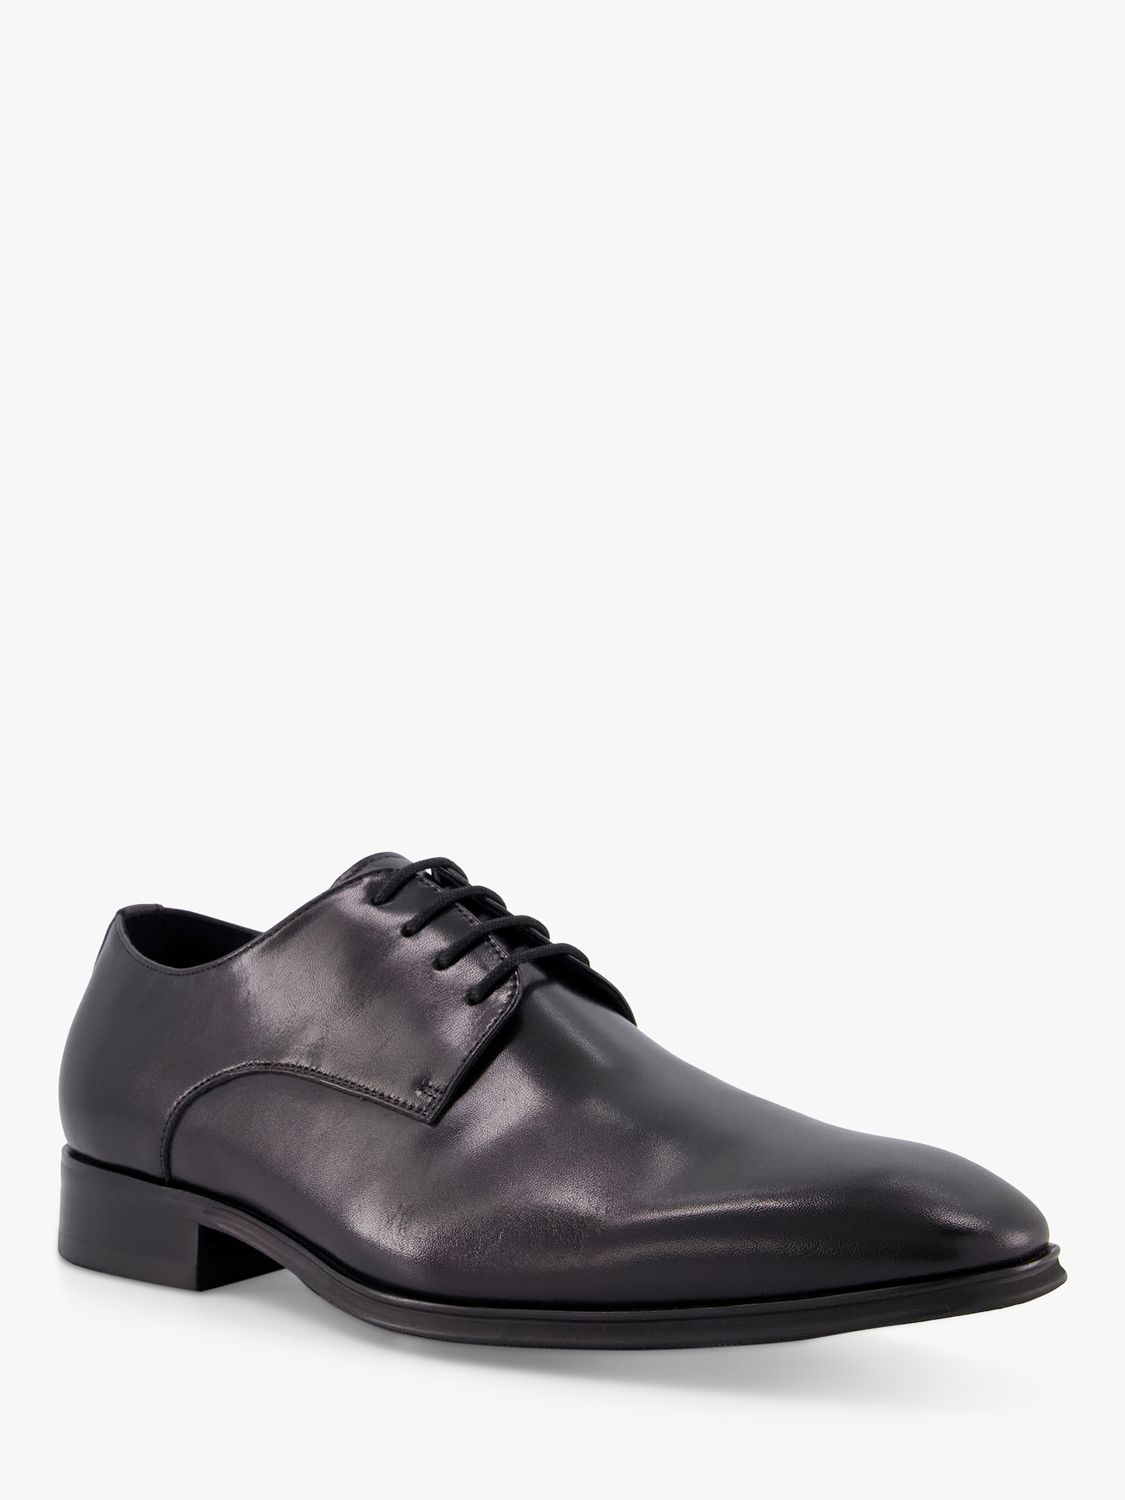 Dune Wide Fit Satchel Leather Oxford Shoes, Black at John Lewis & Partners